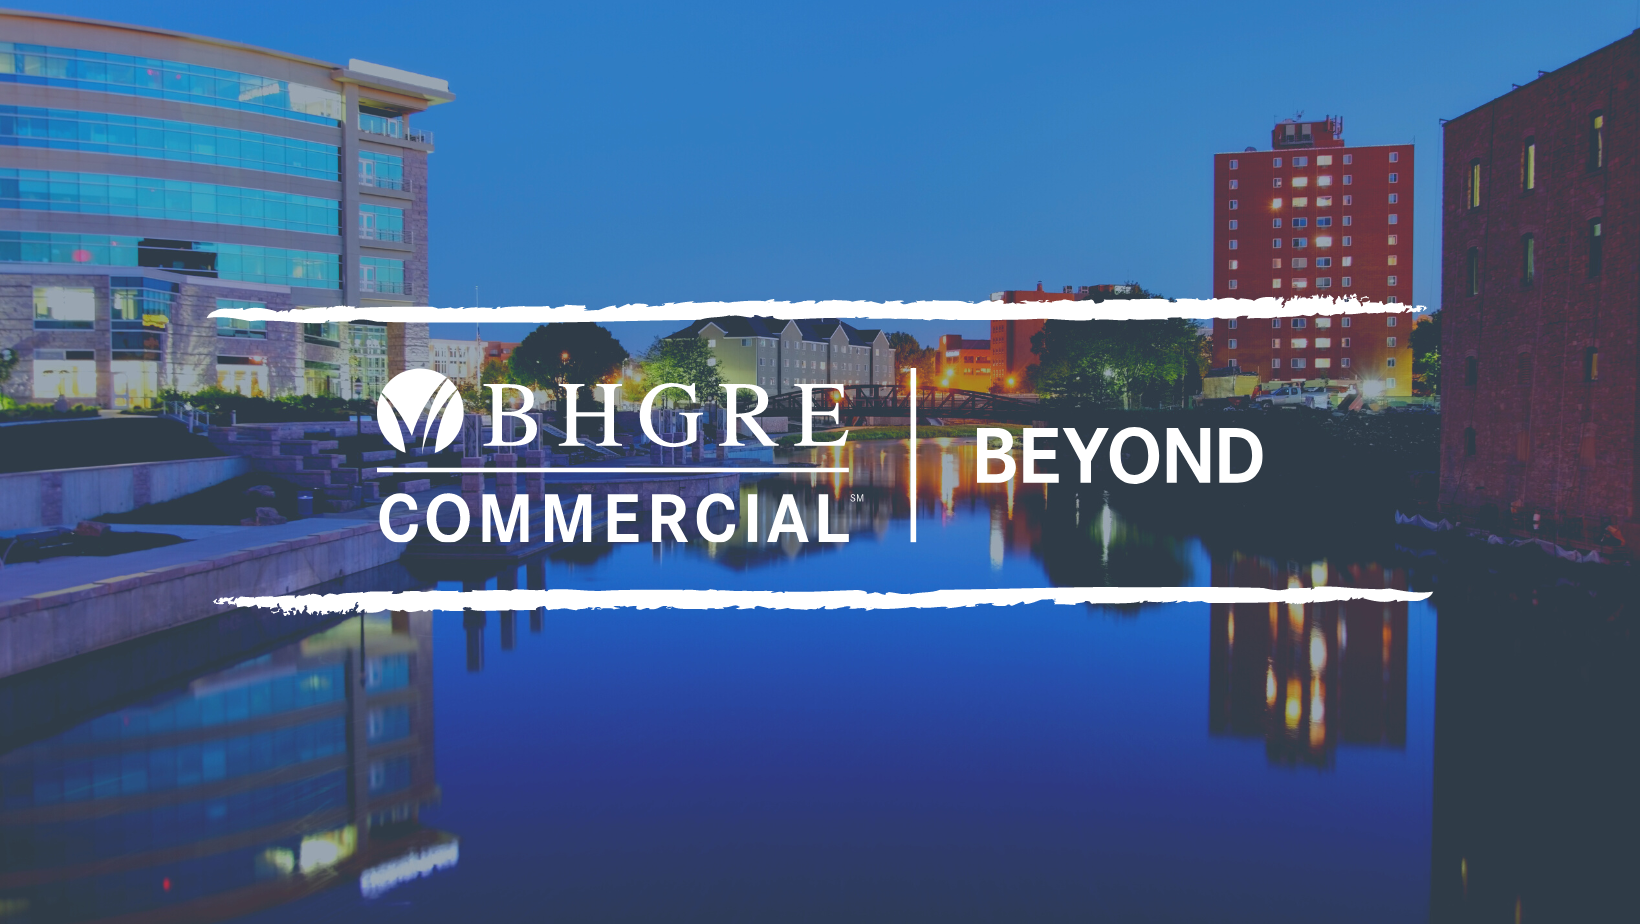 BHGRE Commercial Beyond